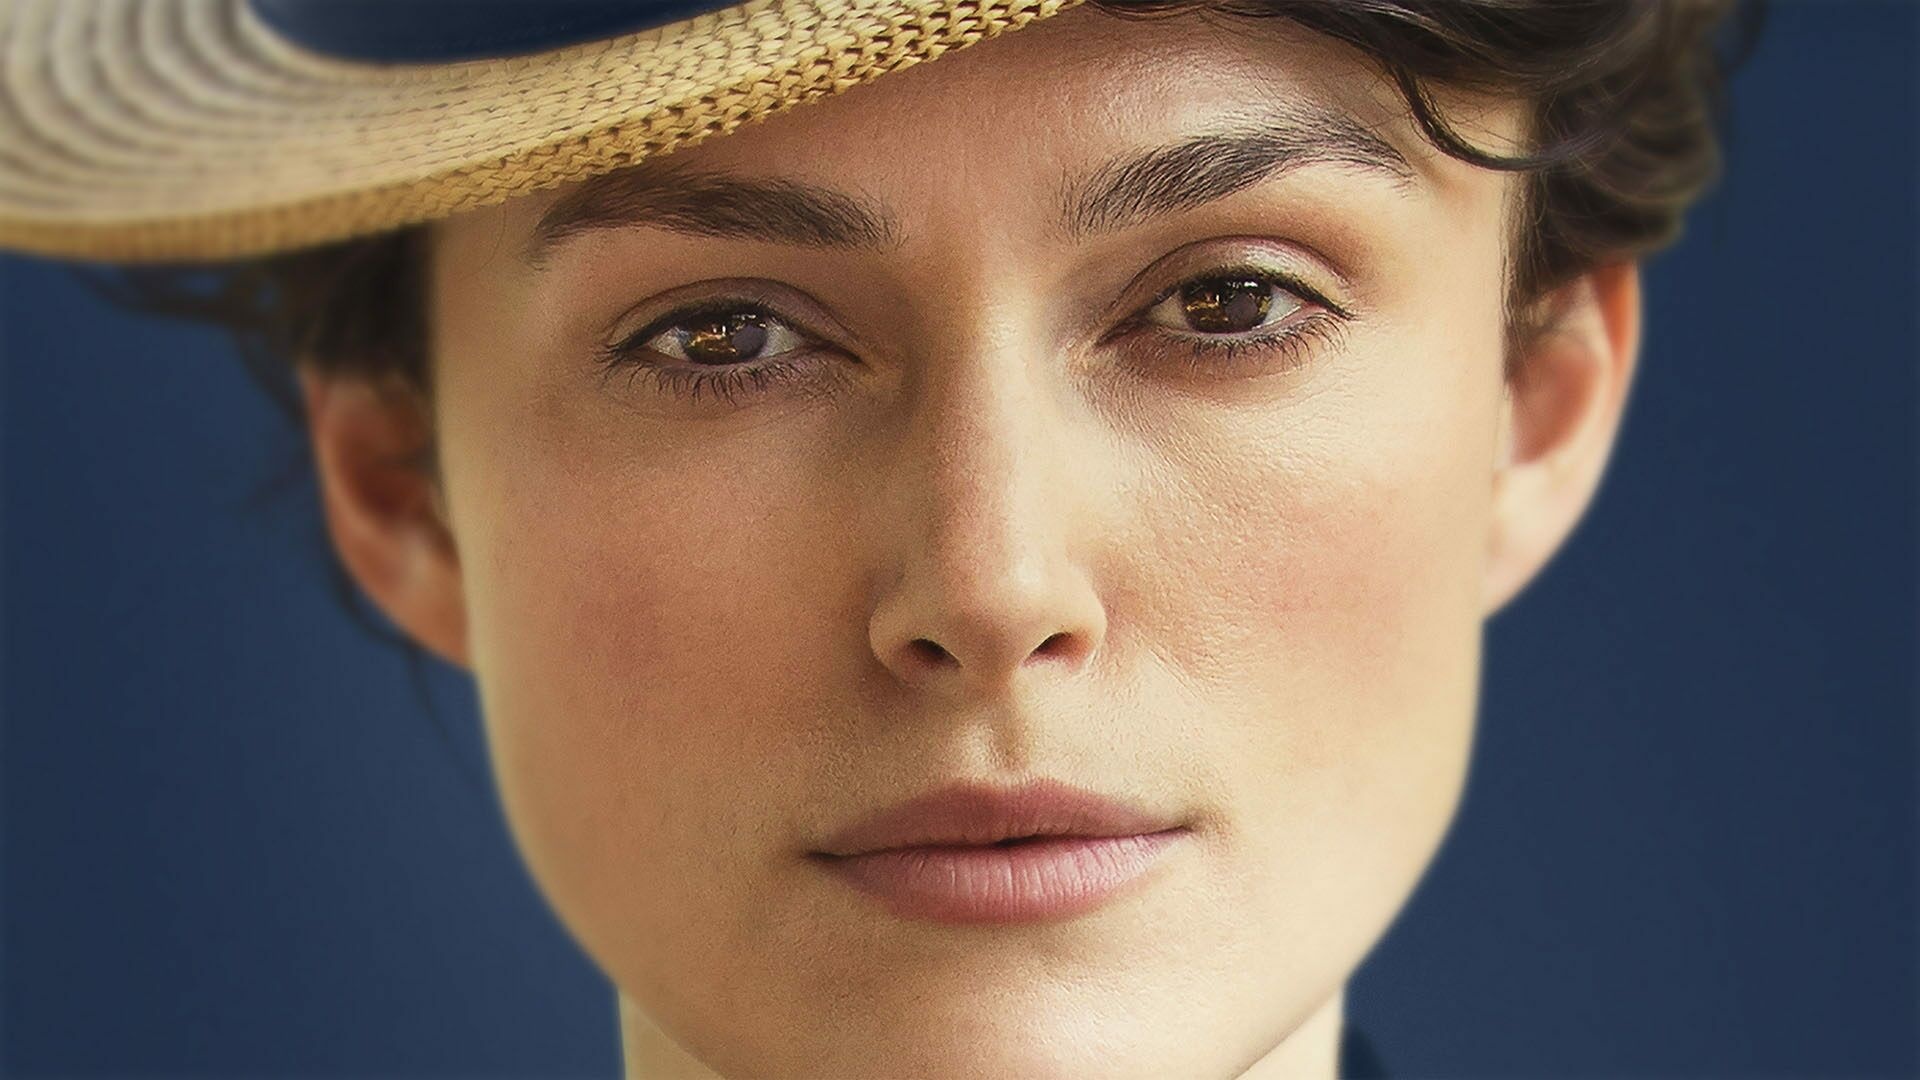 Colette movie, Keira Knightley's portrayal, Review of the film, Feminist narrative, 1920x1080 Full HD Desktop